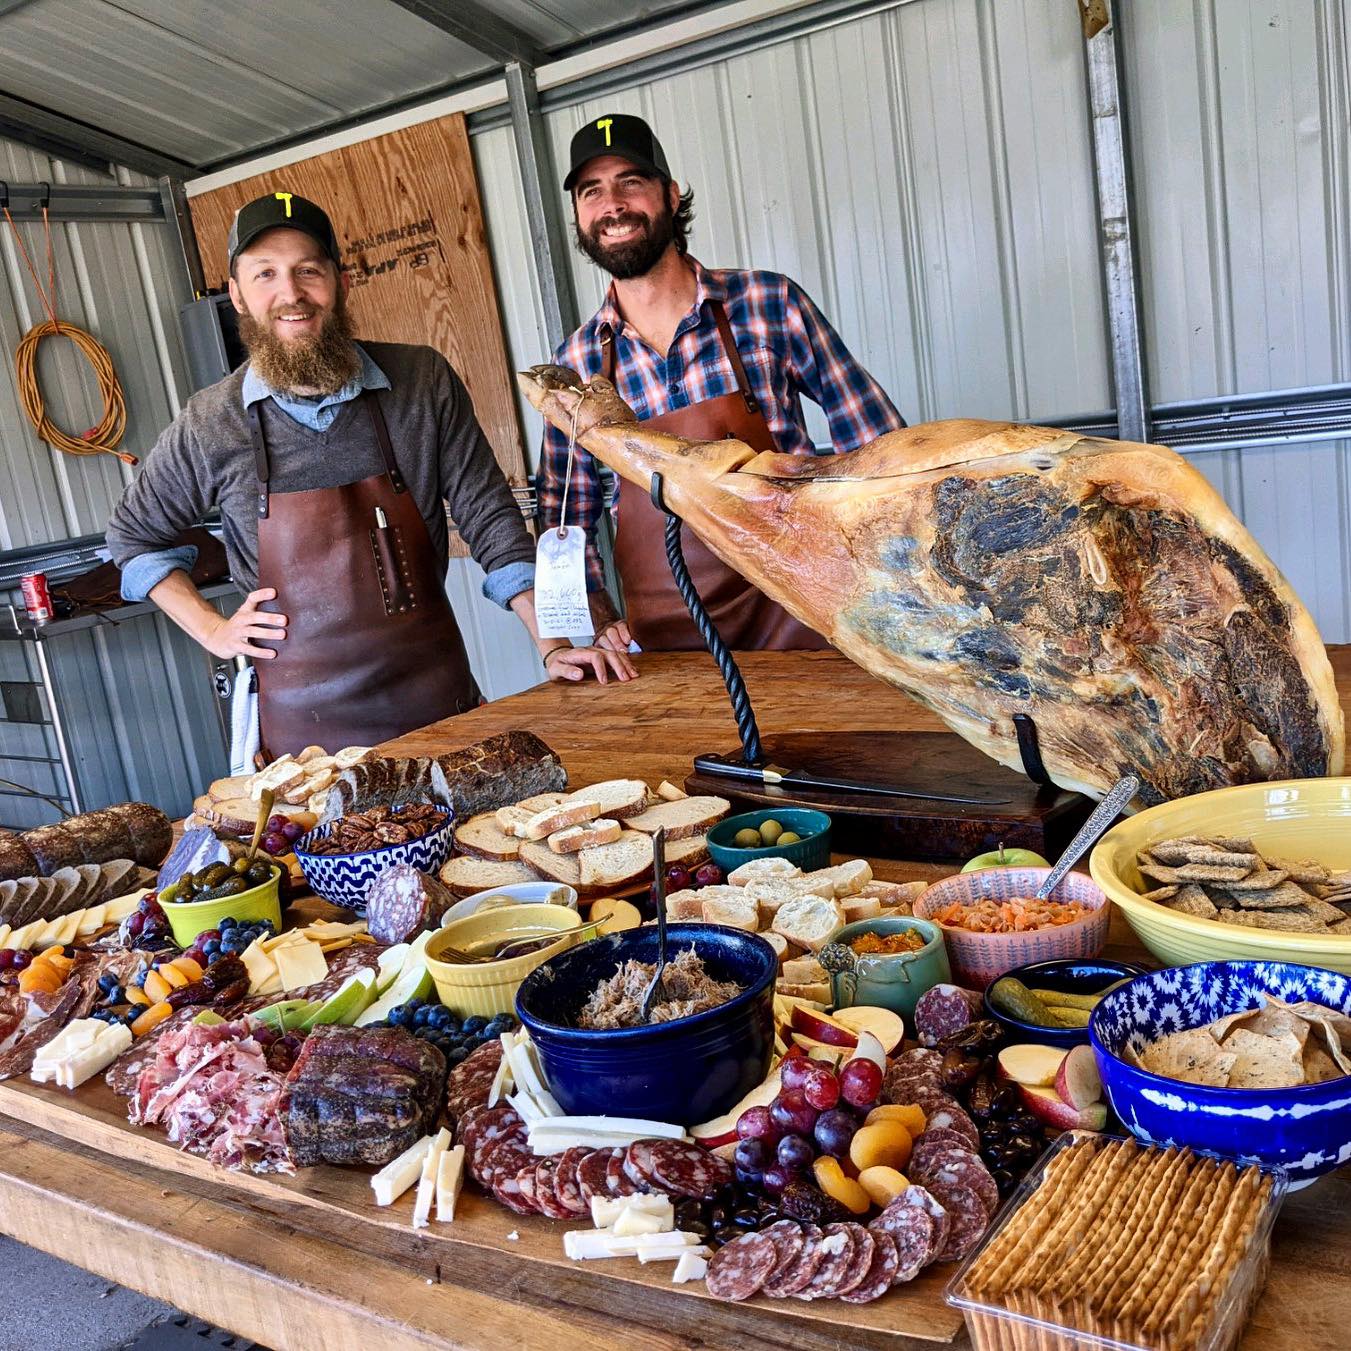 An image of two people in front of a spread of various types of meats and crackers.